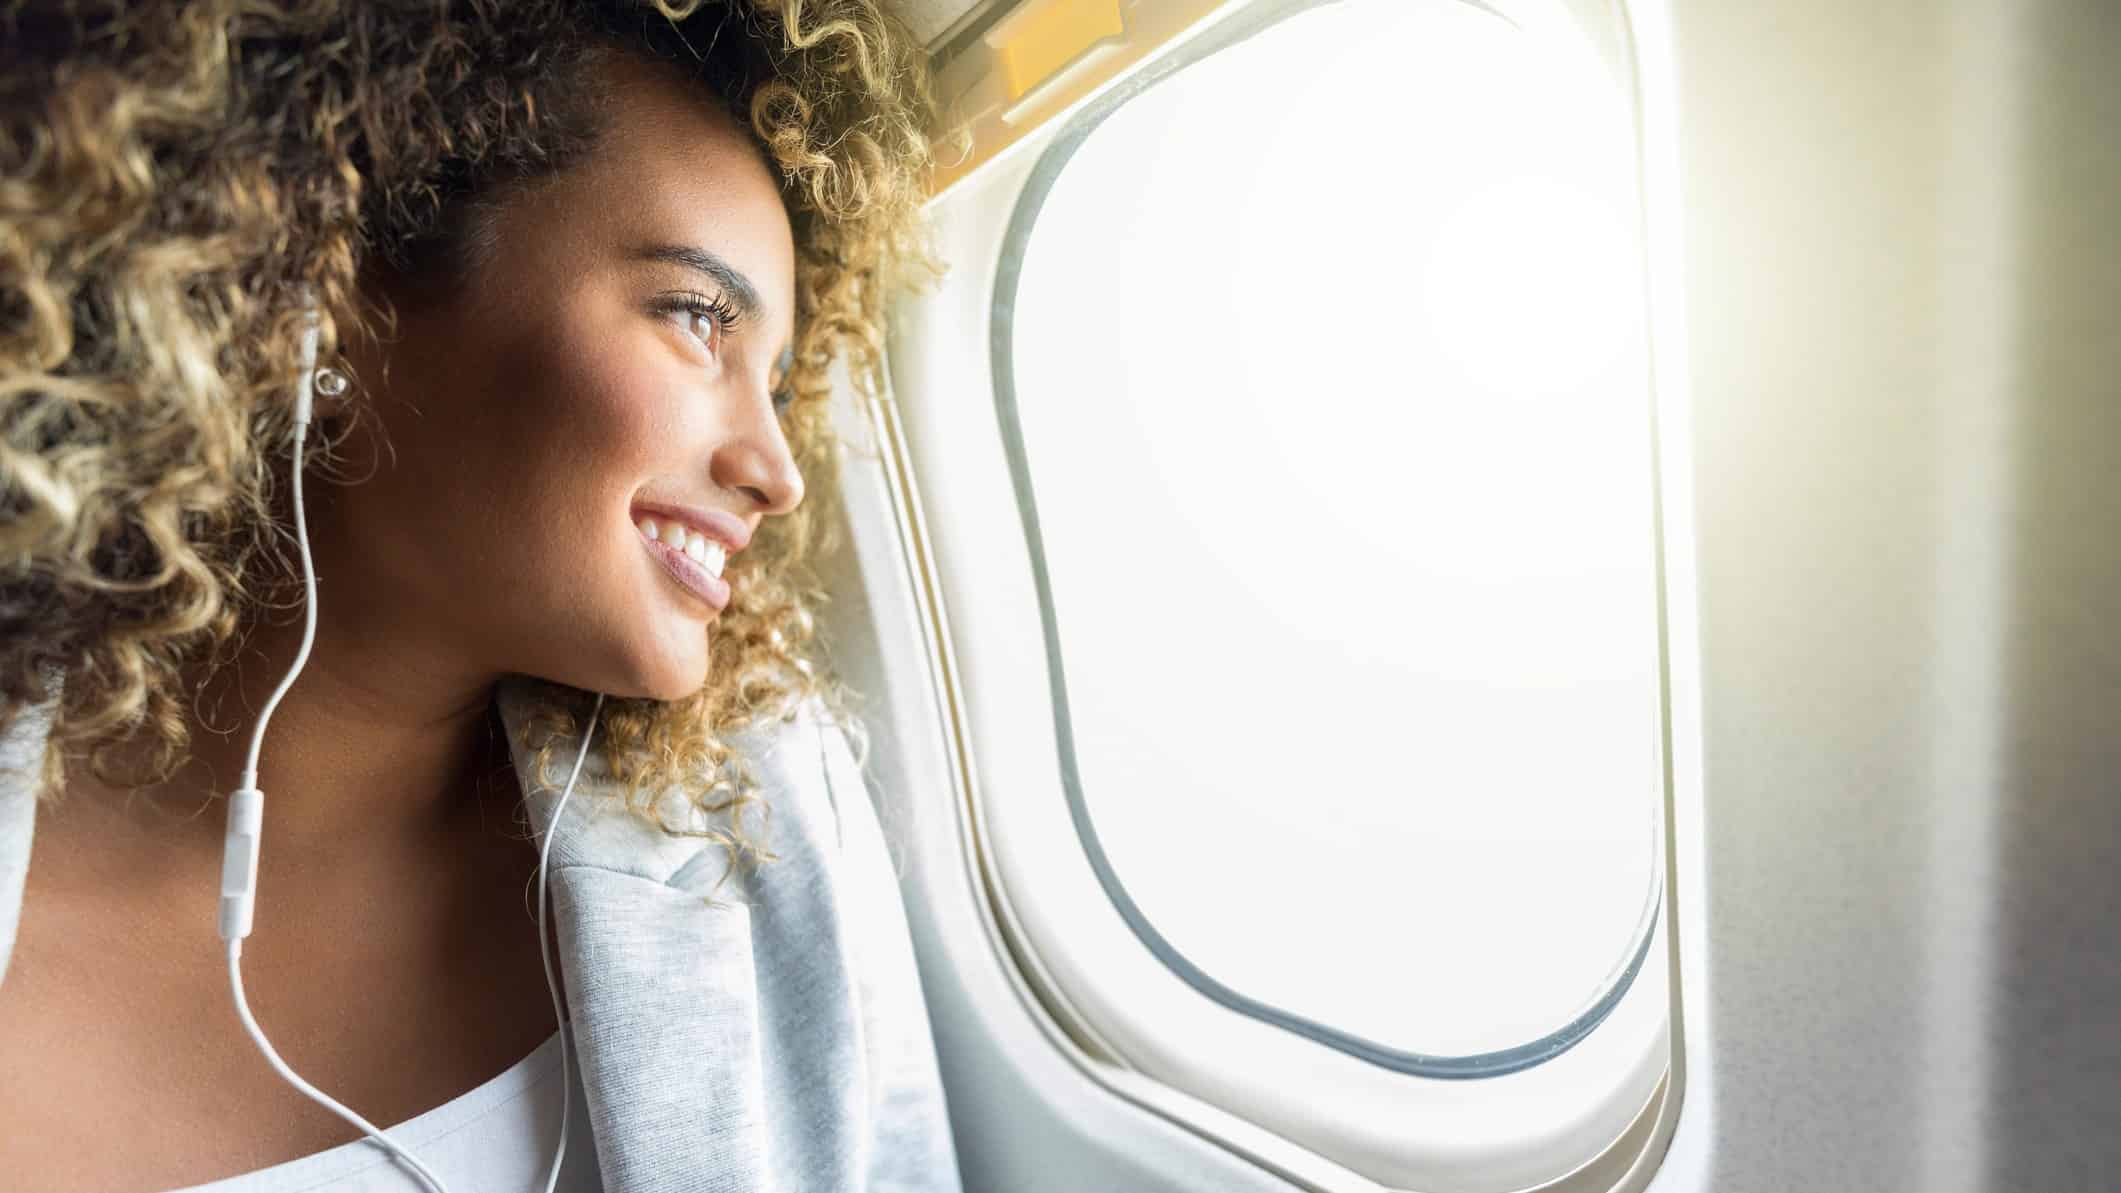 A woman smiles as she looks out an aeroplane window.